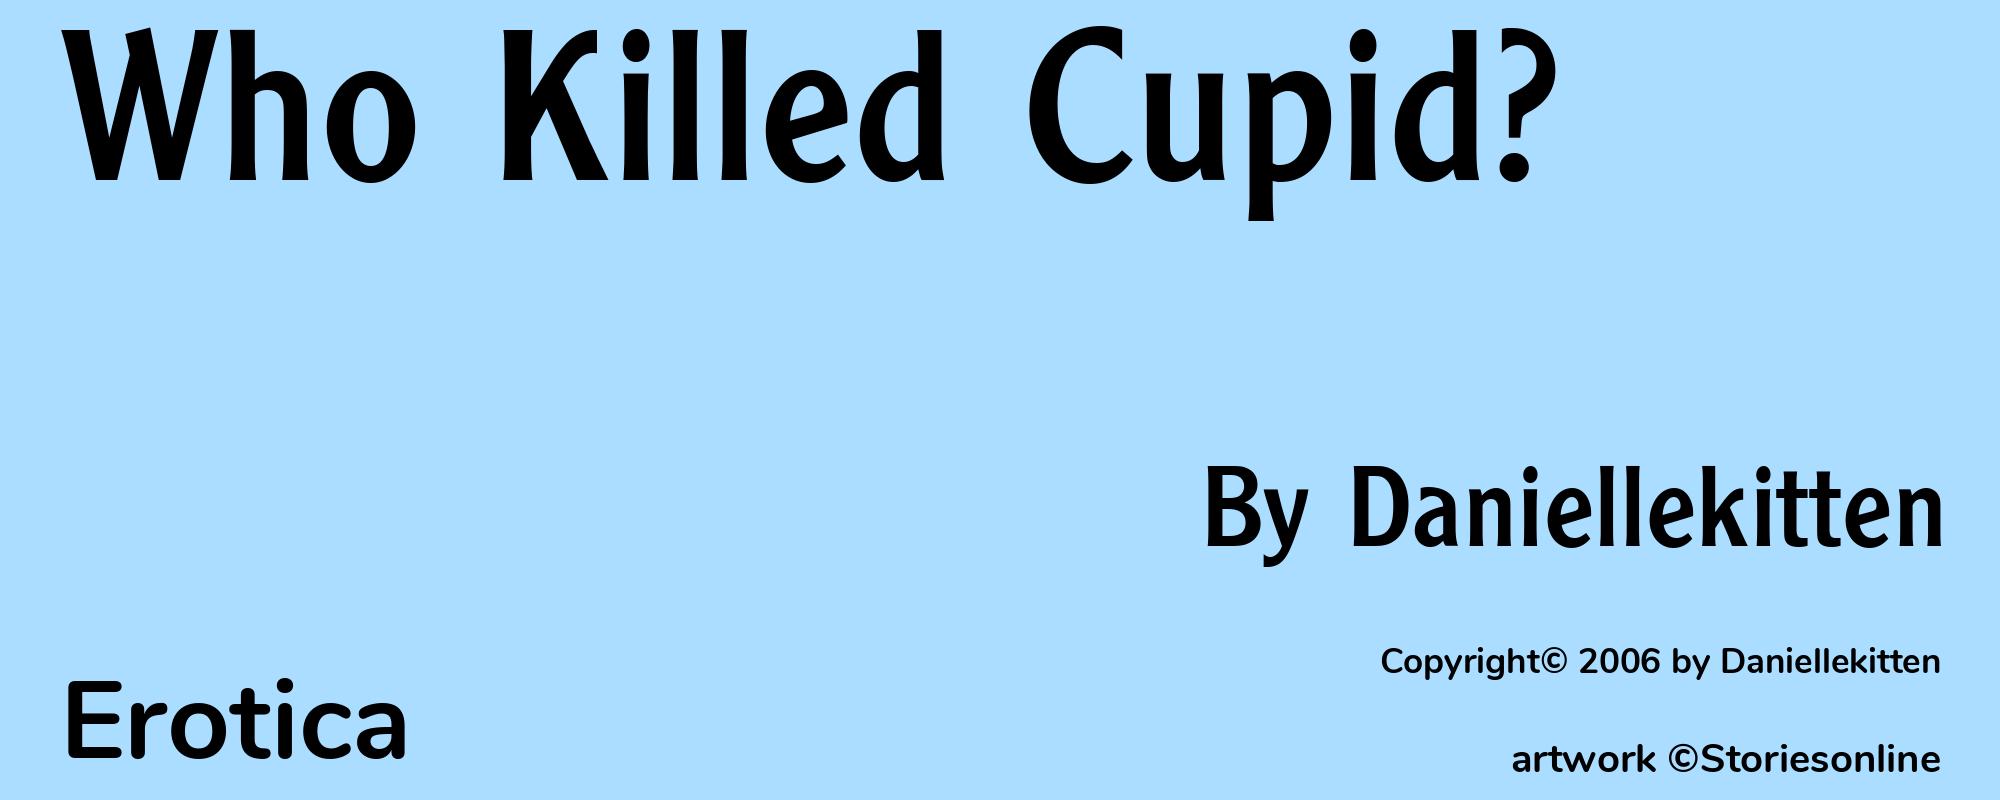 Who Killed Cupid? - Cover